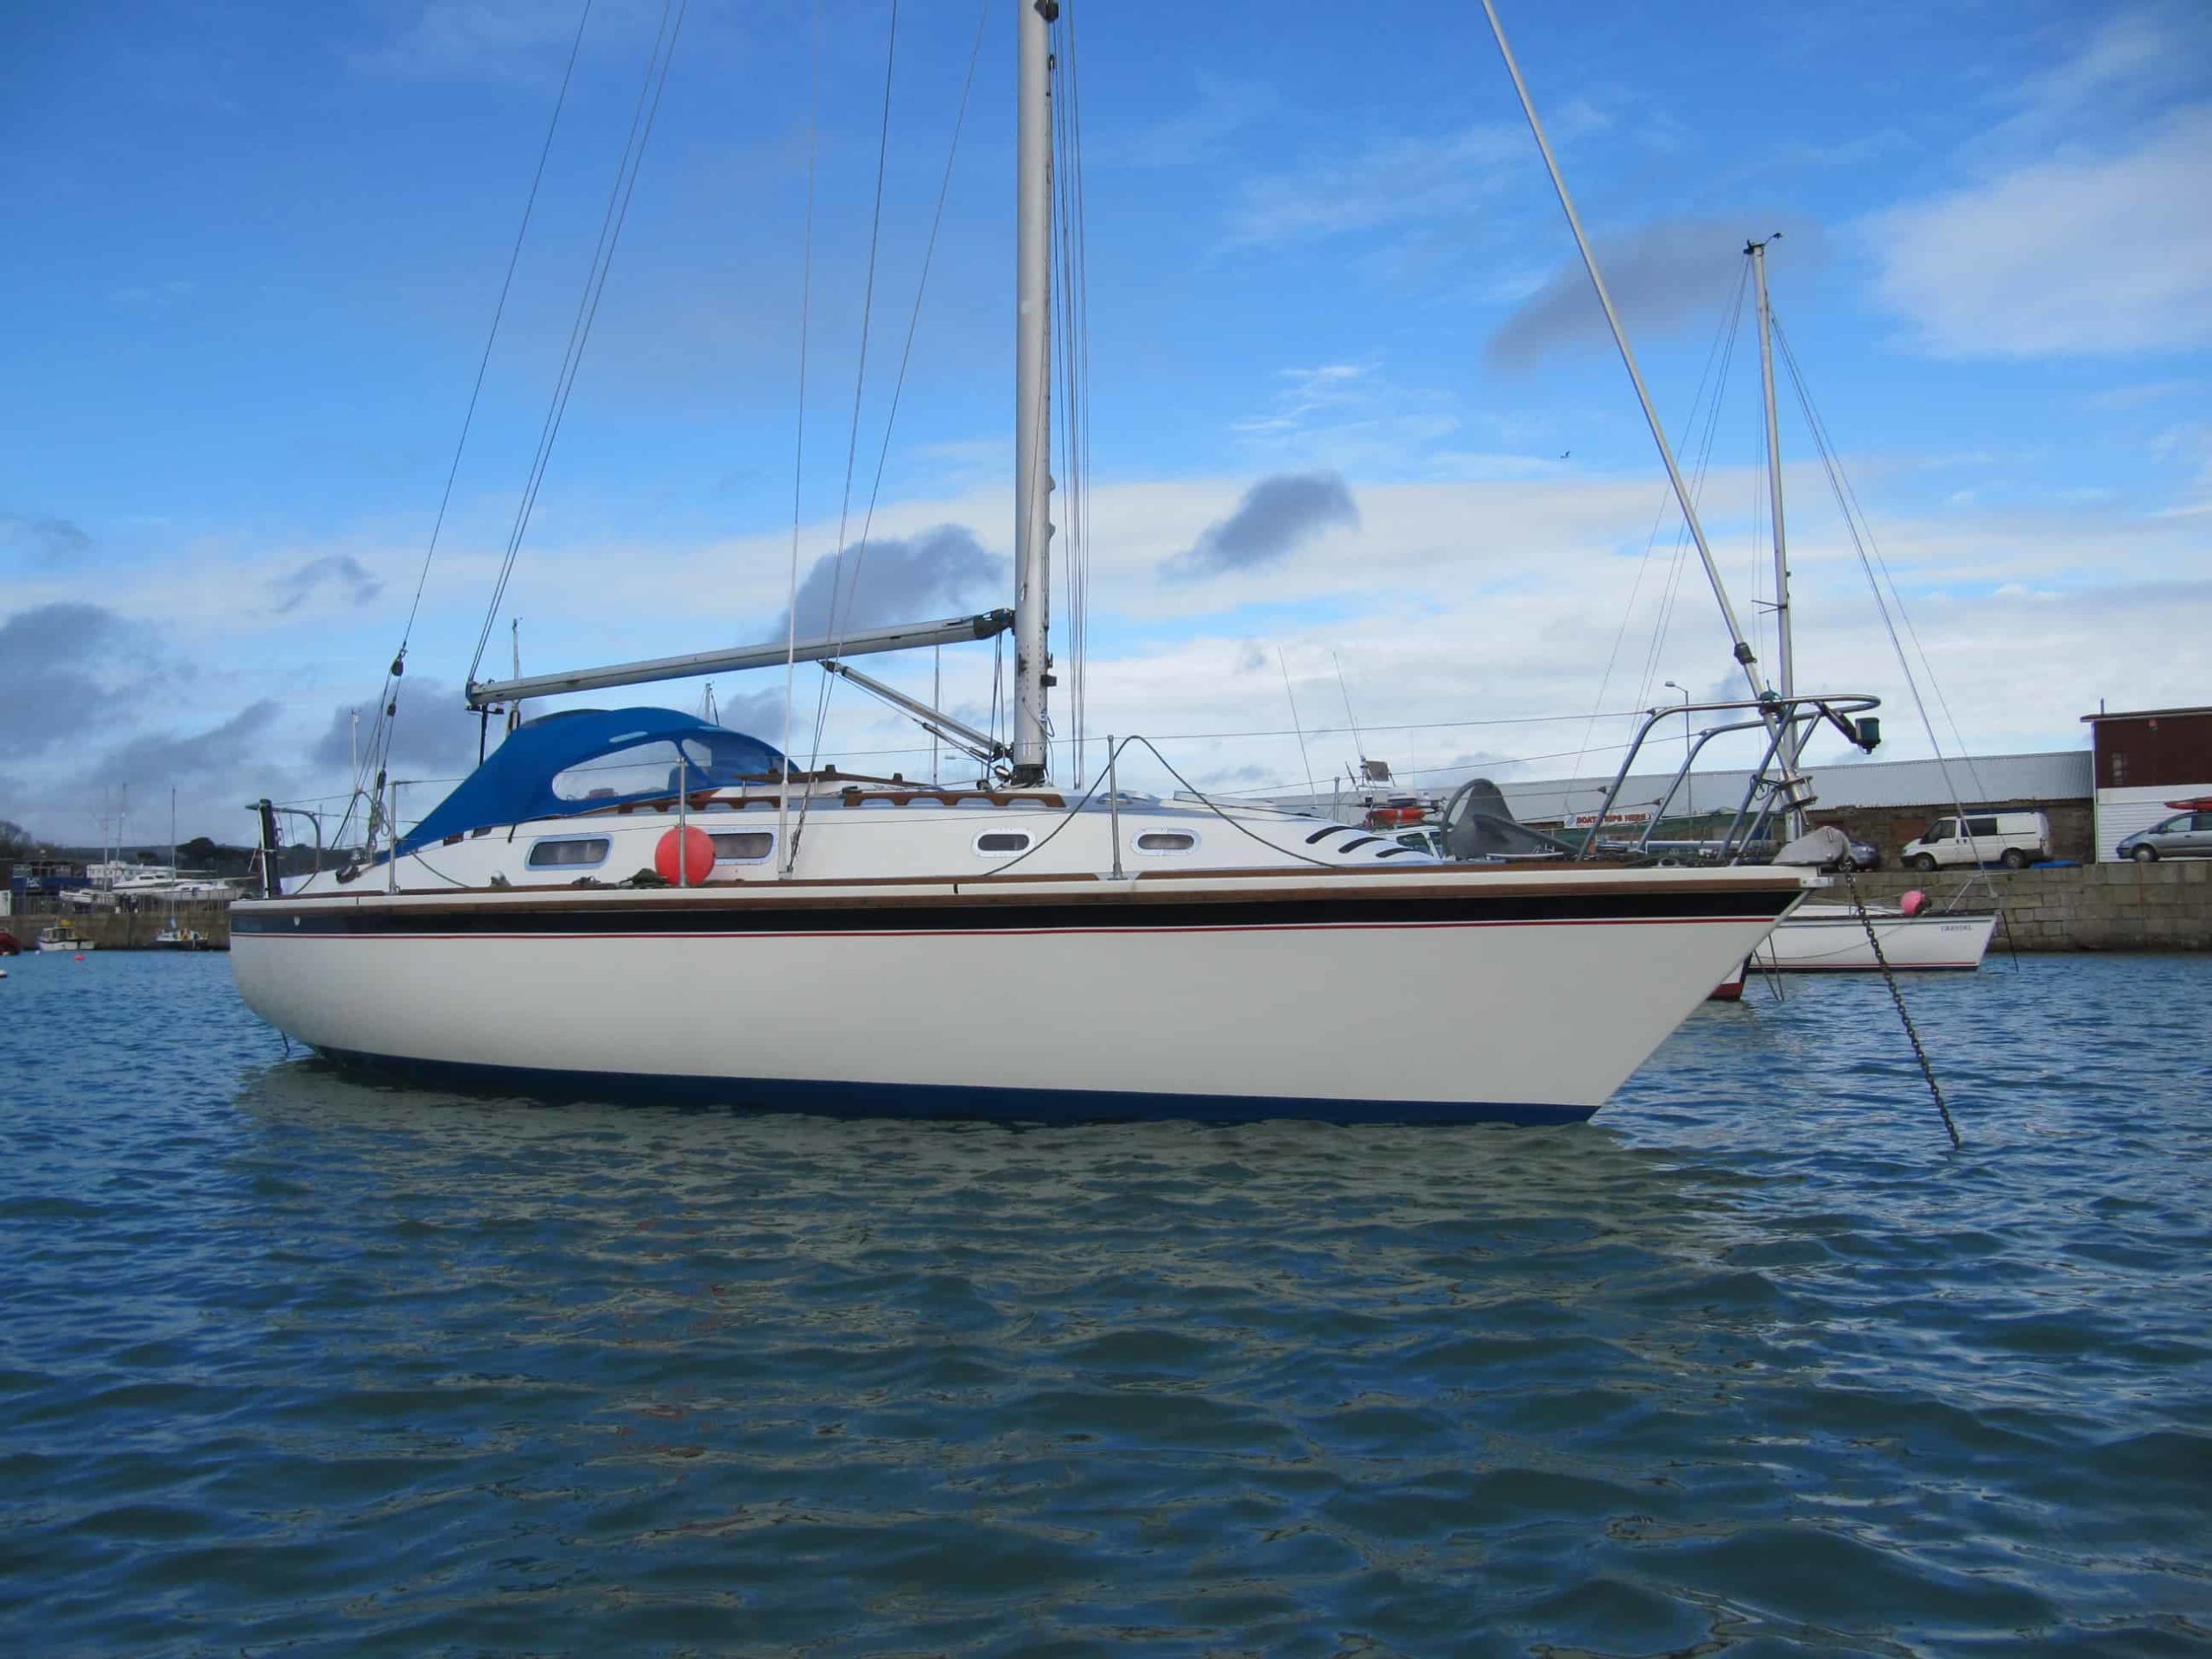 A Westerly Fulmar yacht moored and ready for delivery to Spain.